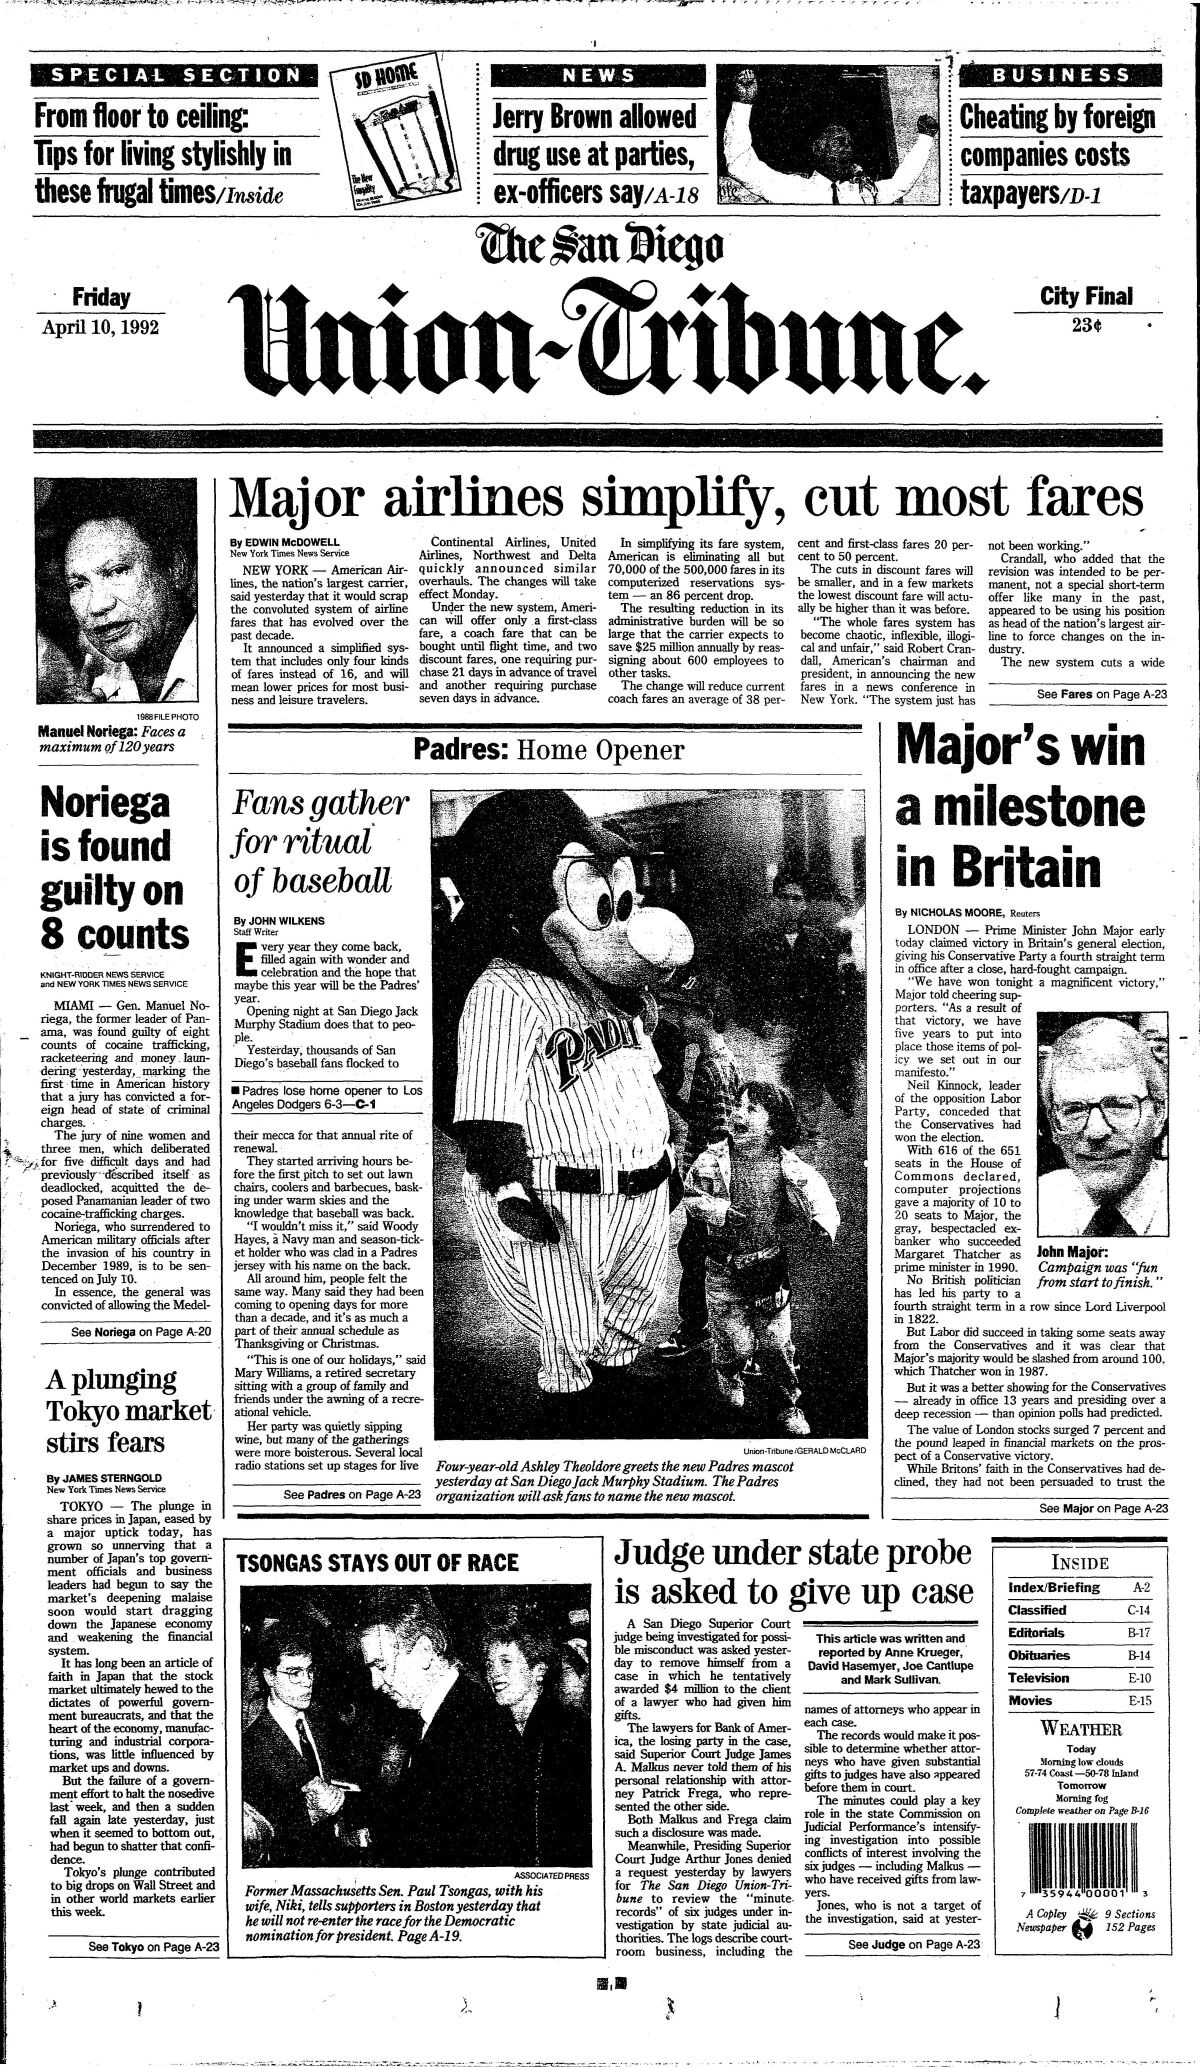 The Front Page of The San Diego Union-Tribune, April 10, 1992.